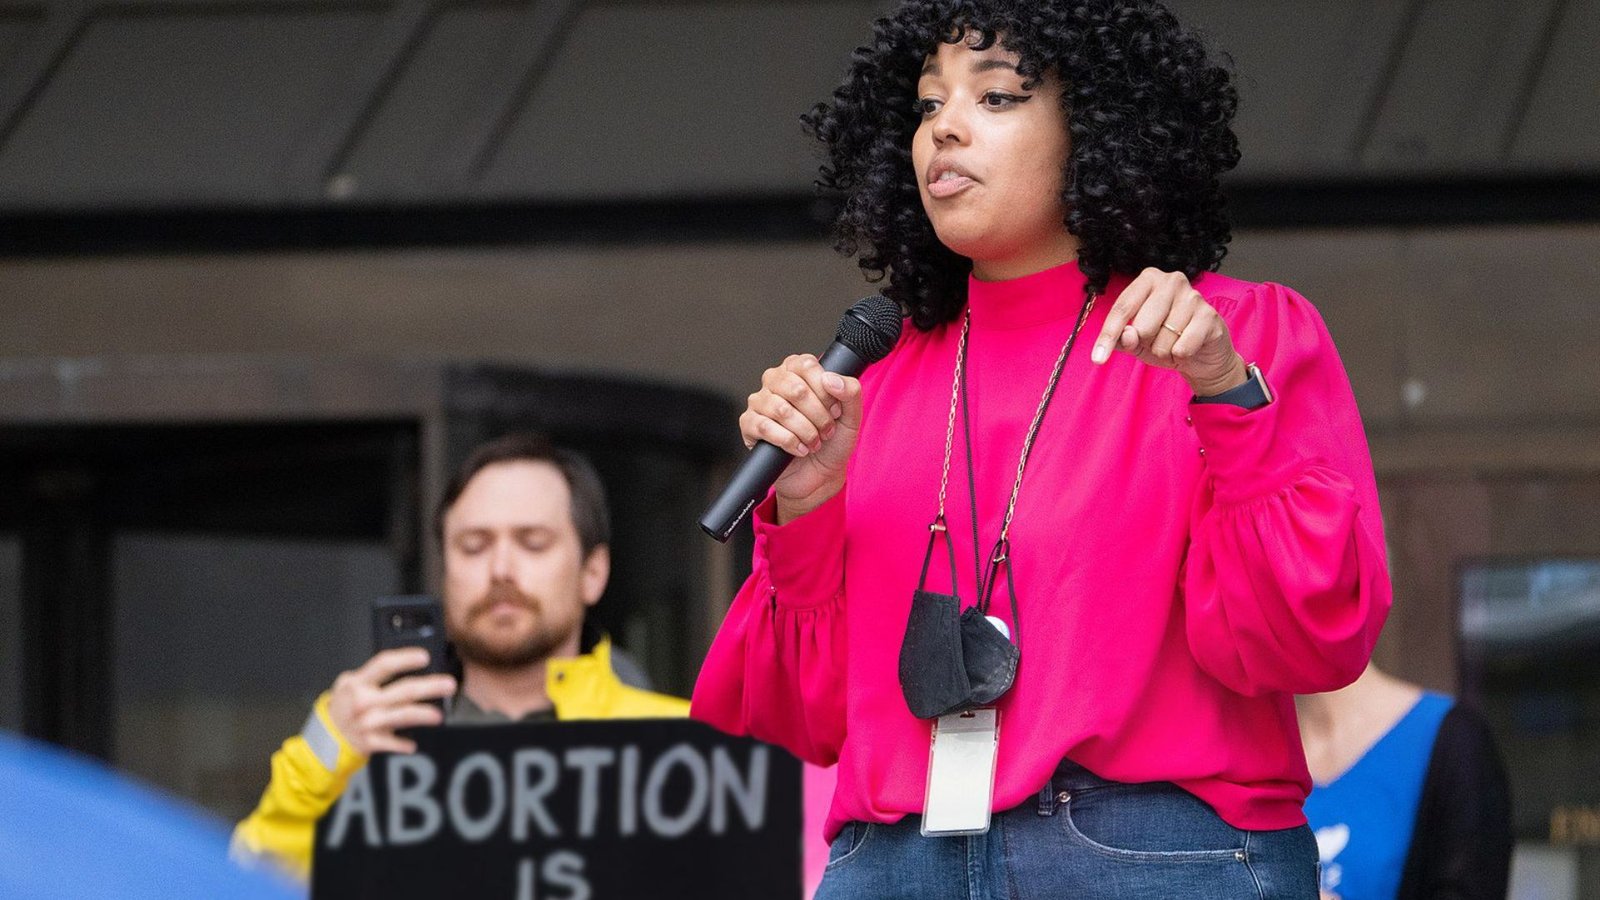 An African American Woman Giving a Speech at Abortion Protest